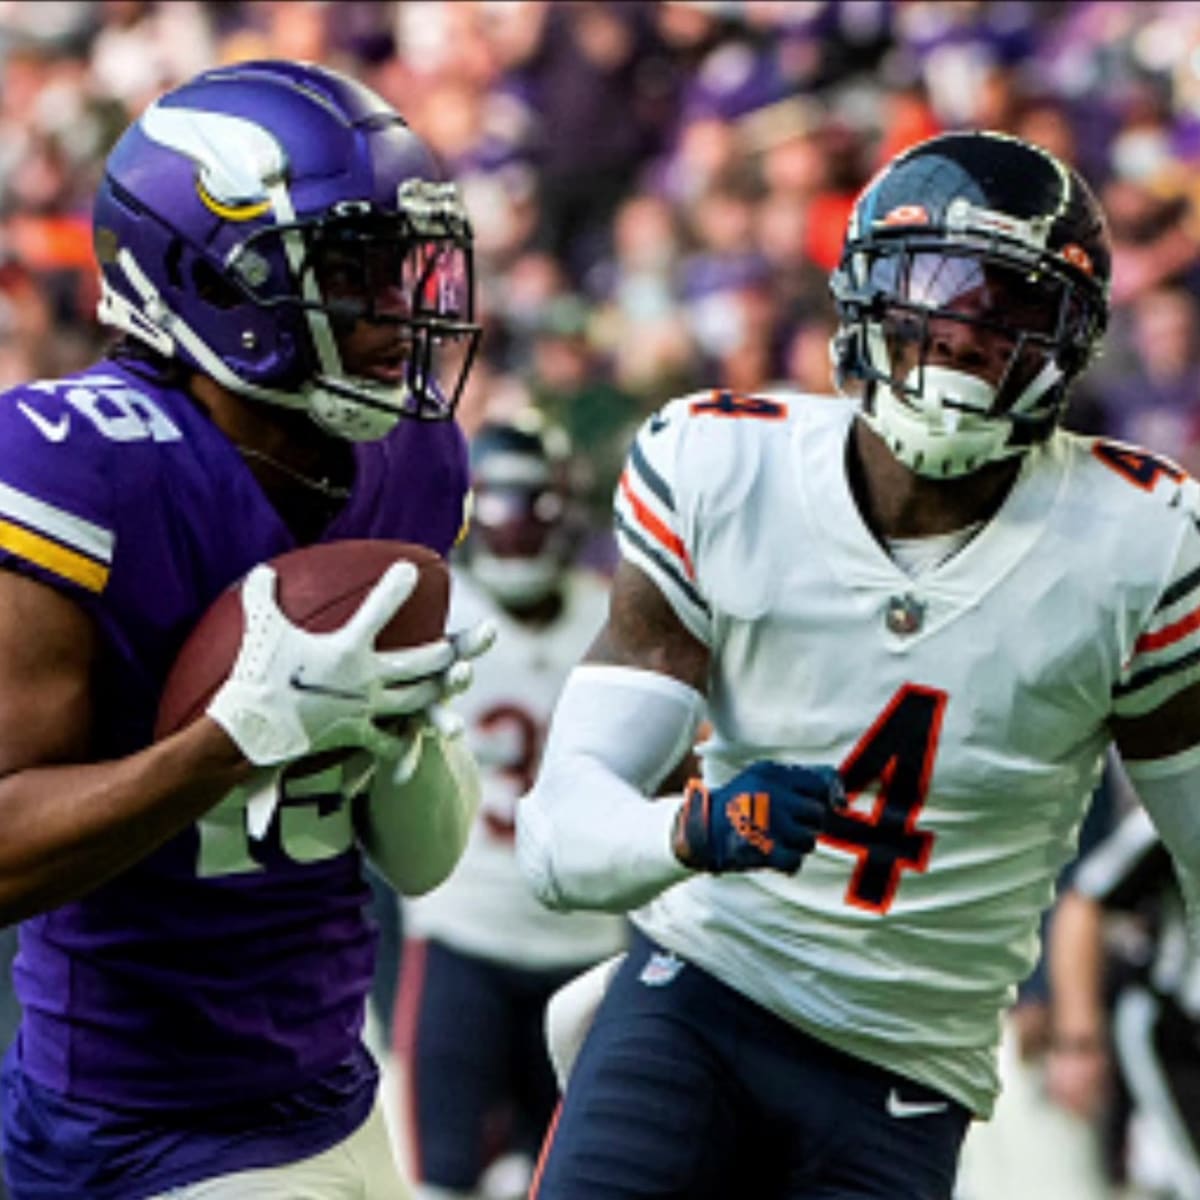 New Chicago Bears receiver has games against Vikings circled